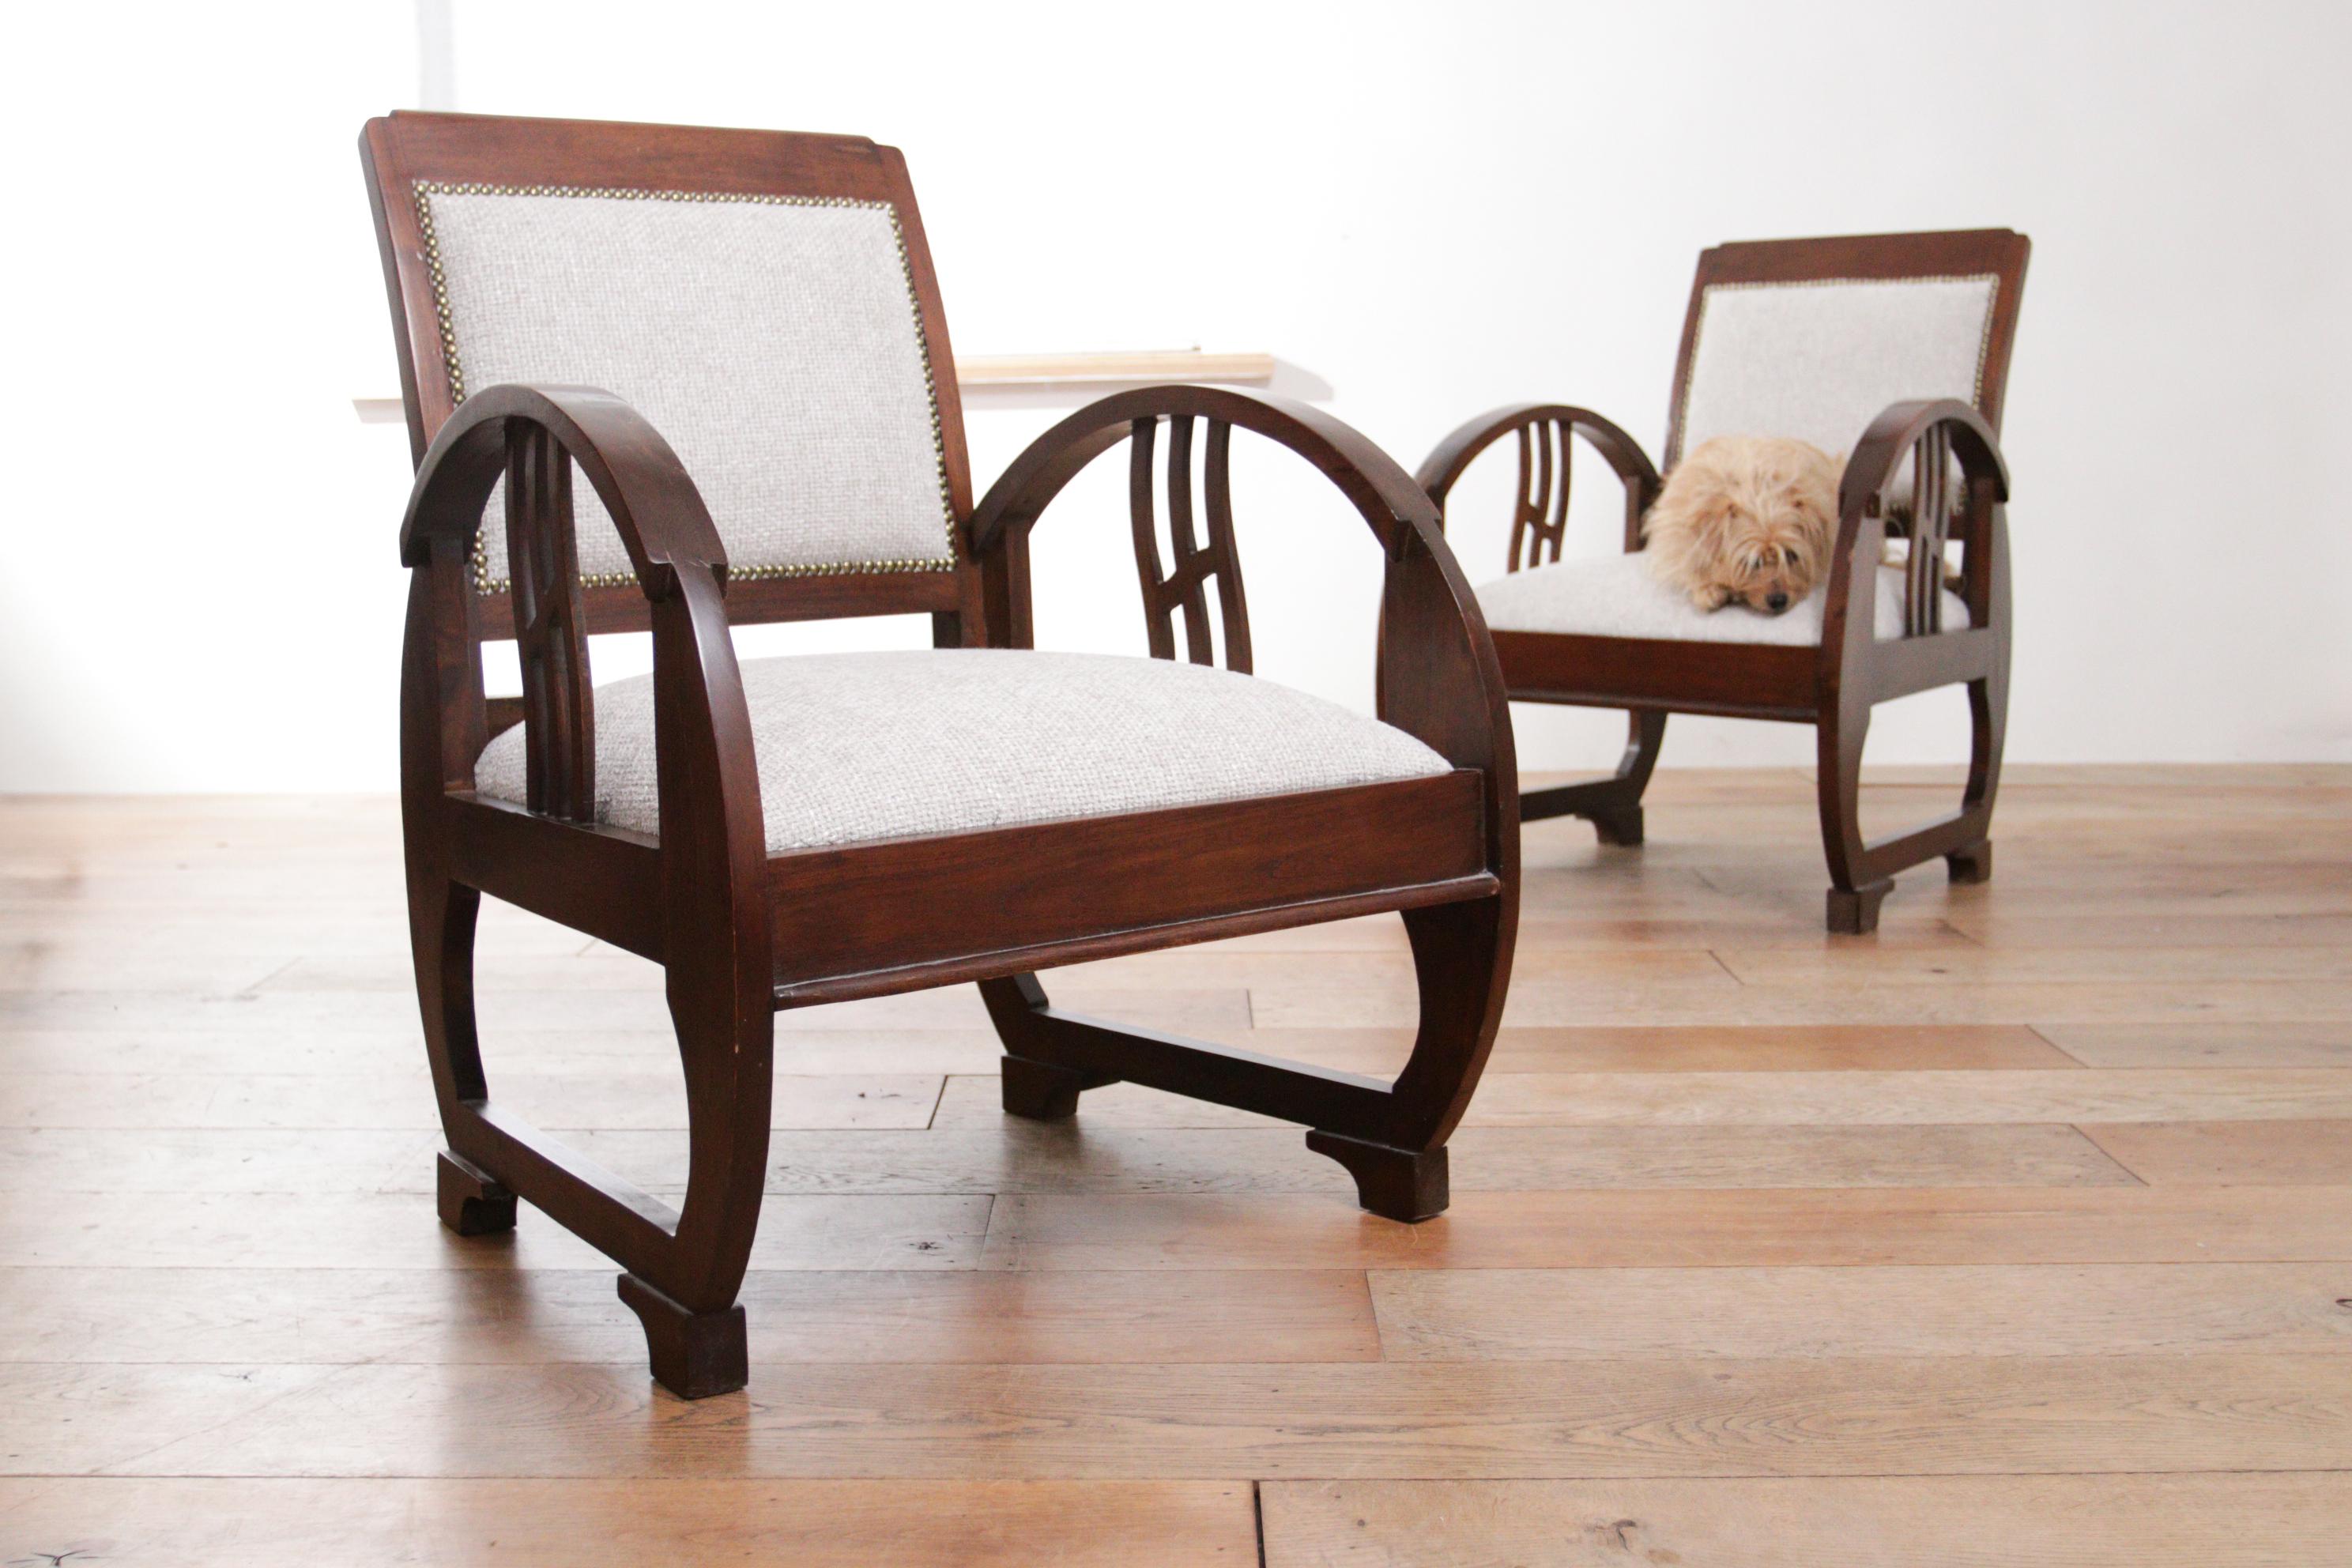 Mid-20th Century Two Rare Exclusive Elegant Art Deco Vintage French Wooden Armchairs 1930's